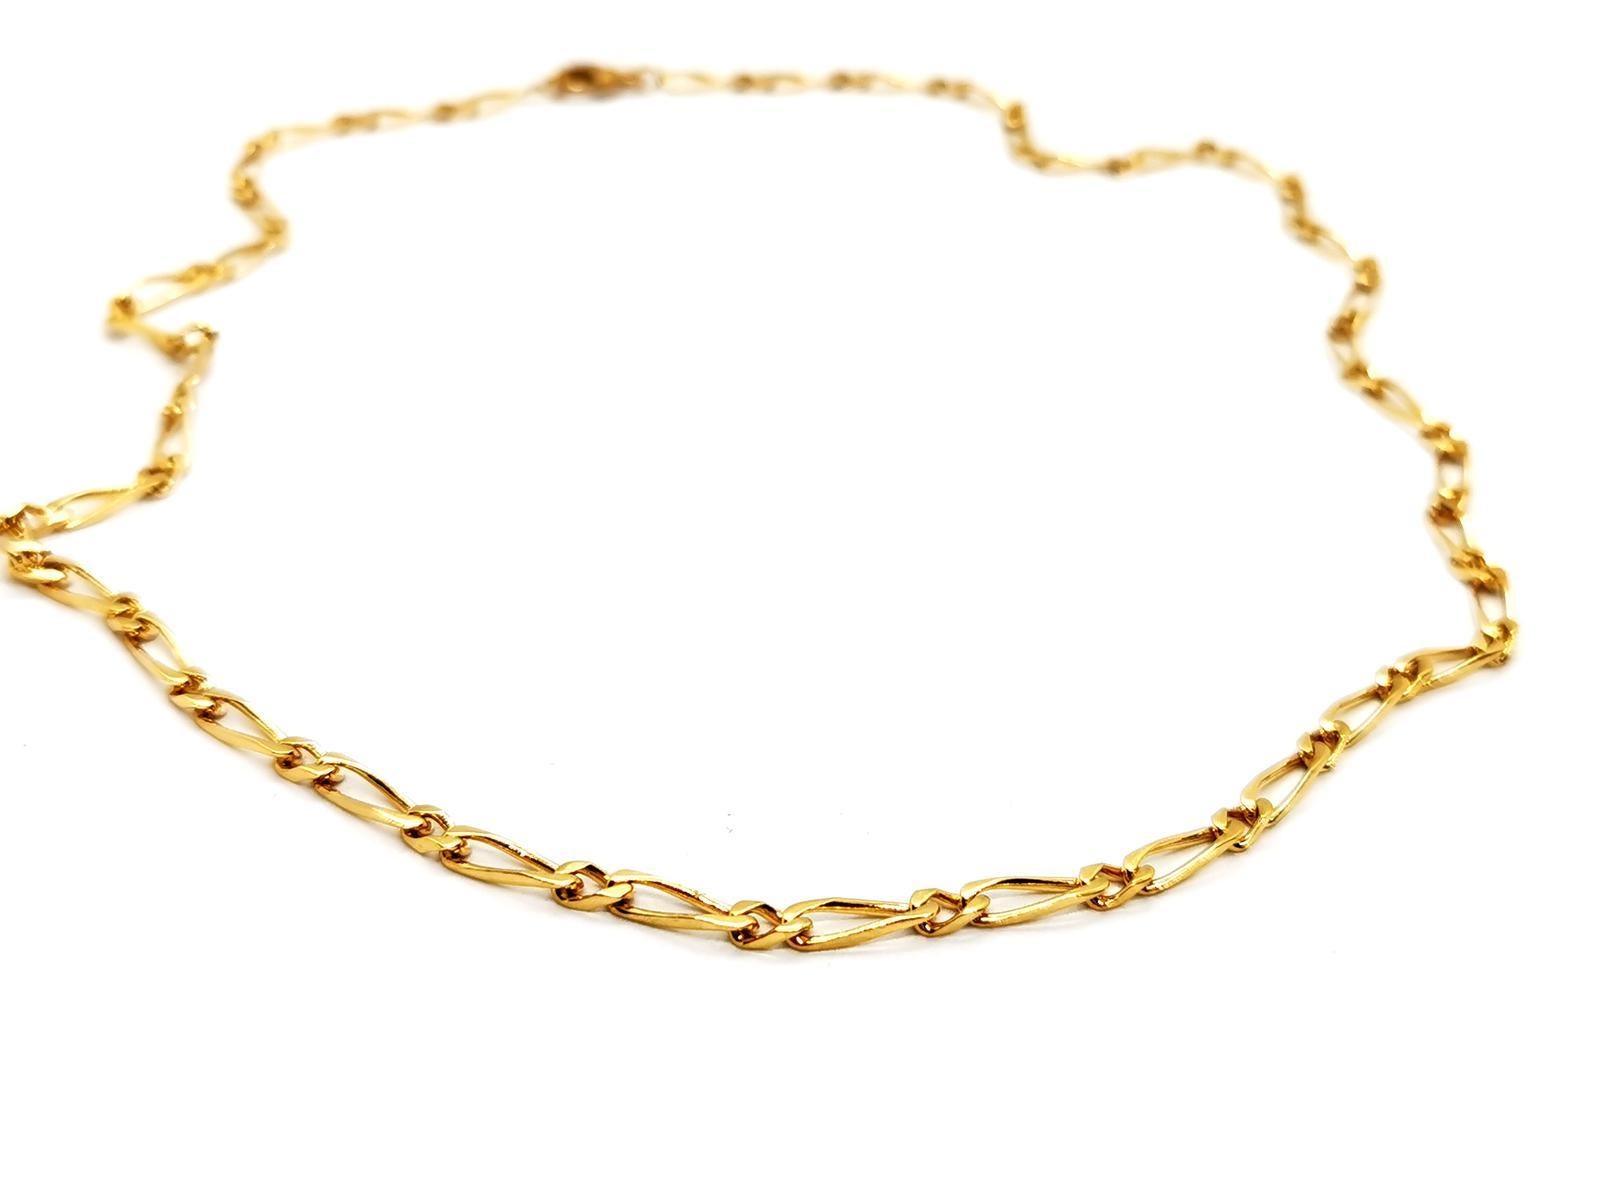 Gold necklace yellow 750 mils (18 carats). horse alternately mesh. consisting of an alternating succession of large and small links. chain length: 50 cm. width: 0.3 cm. total weight: 15.41 g. lobster clasp. eagle head punch. excellent condition.
